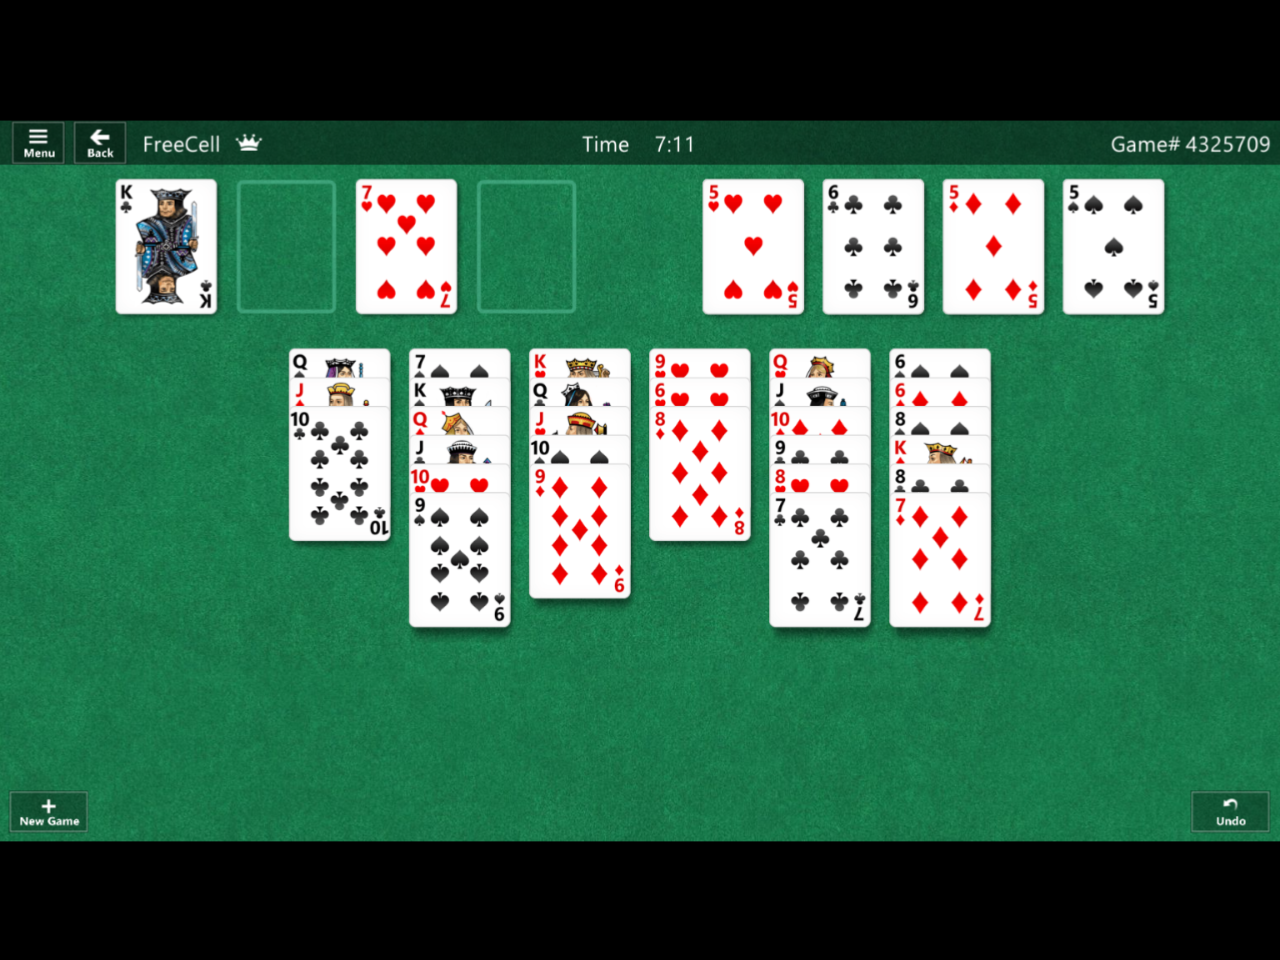 windows 10 microsoft solitaire collection computer crashes